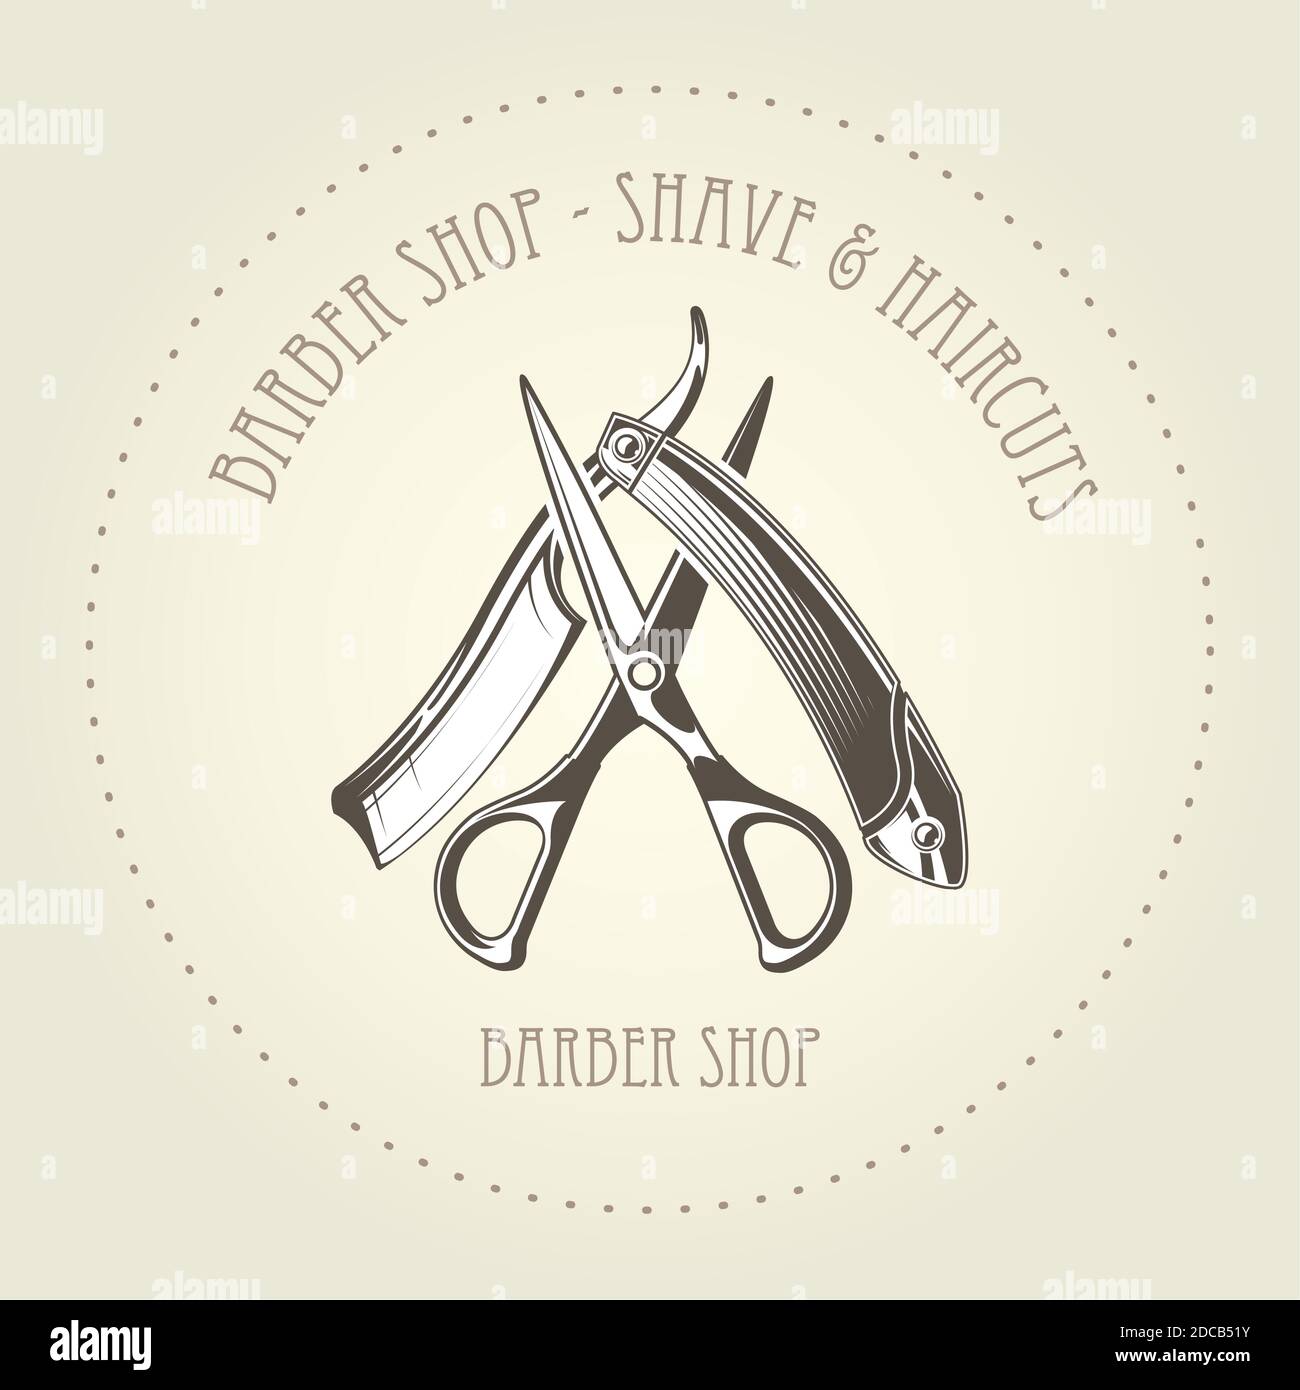 Barbershop emblem with old straight razor and scissors overlapping, barber shop logo vector Stock Vector